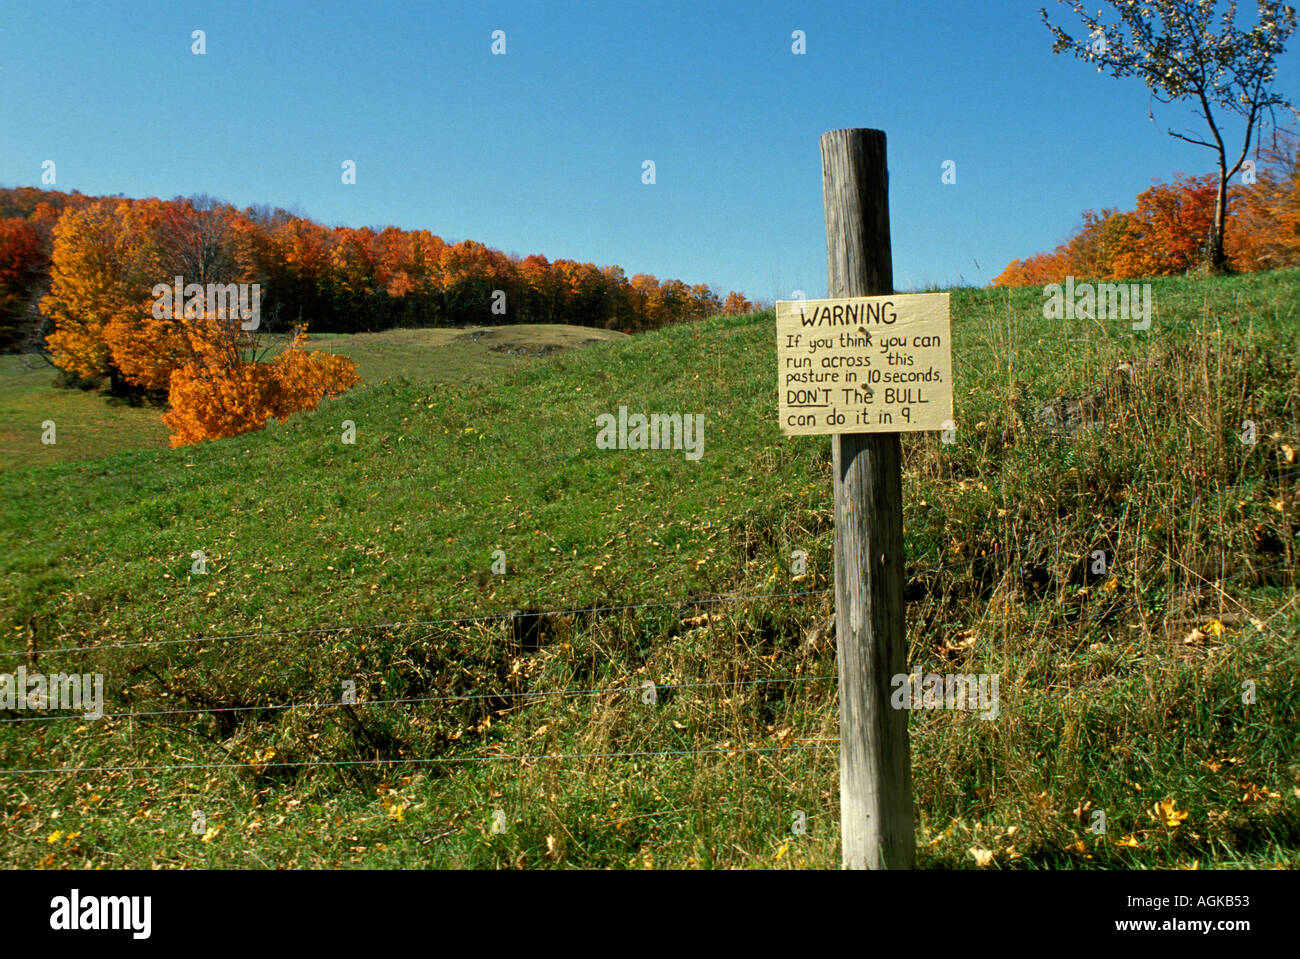 Humorous warning sign about a bull and no trespassing in a grassy field in Vermont United States of America USA Stock Photo